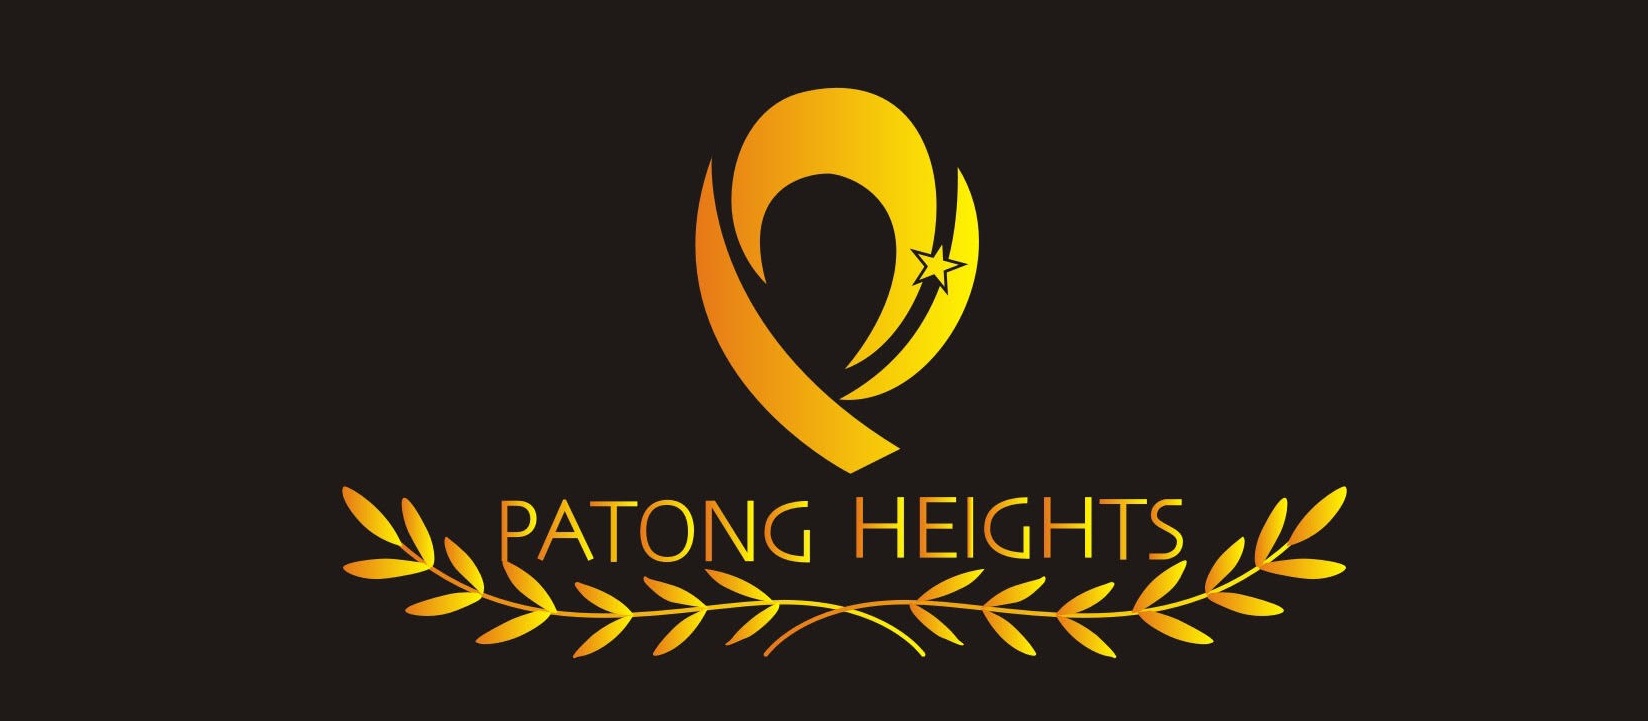 Patong Heights